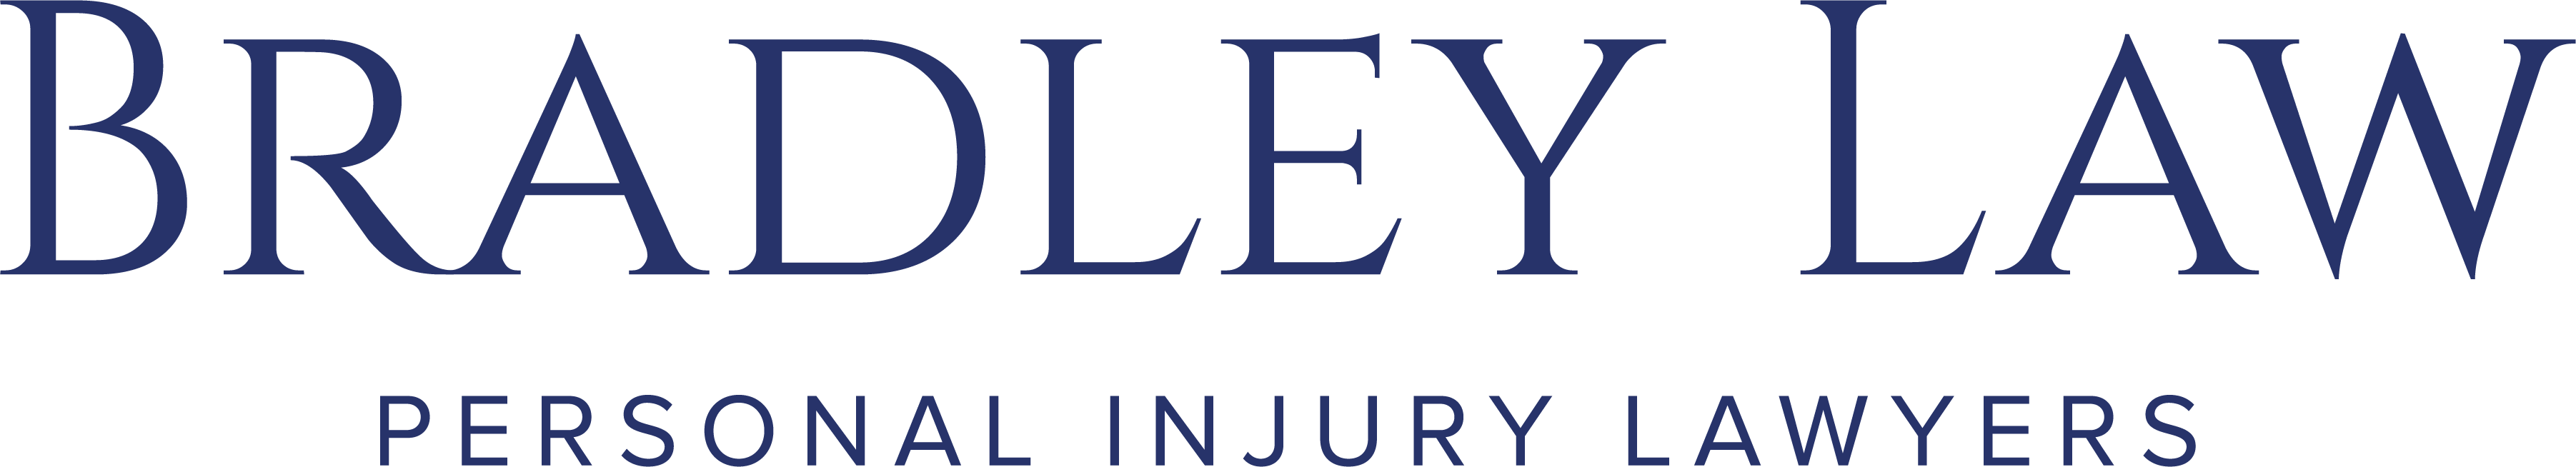 Bradley Law Personal Injury Lawyers - St. Louis review